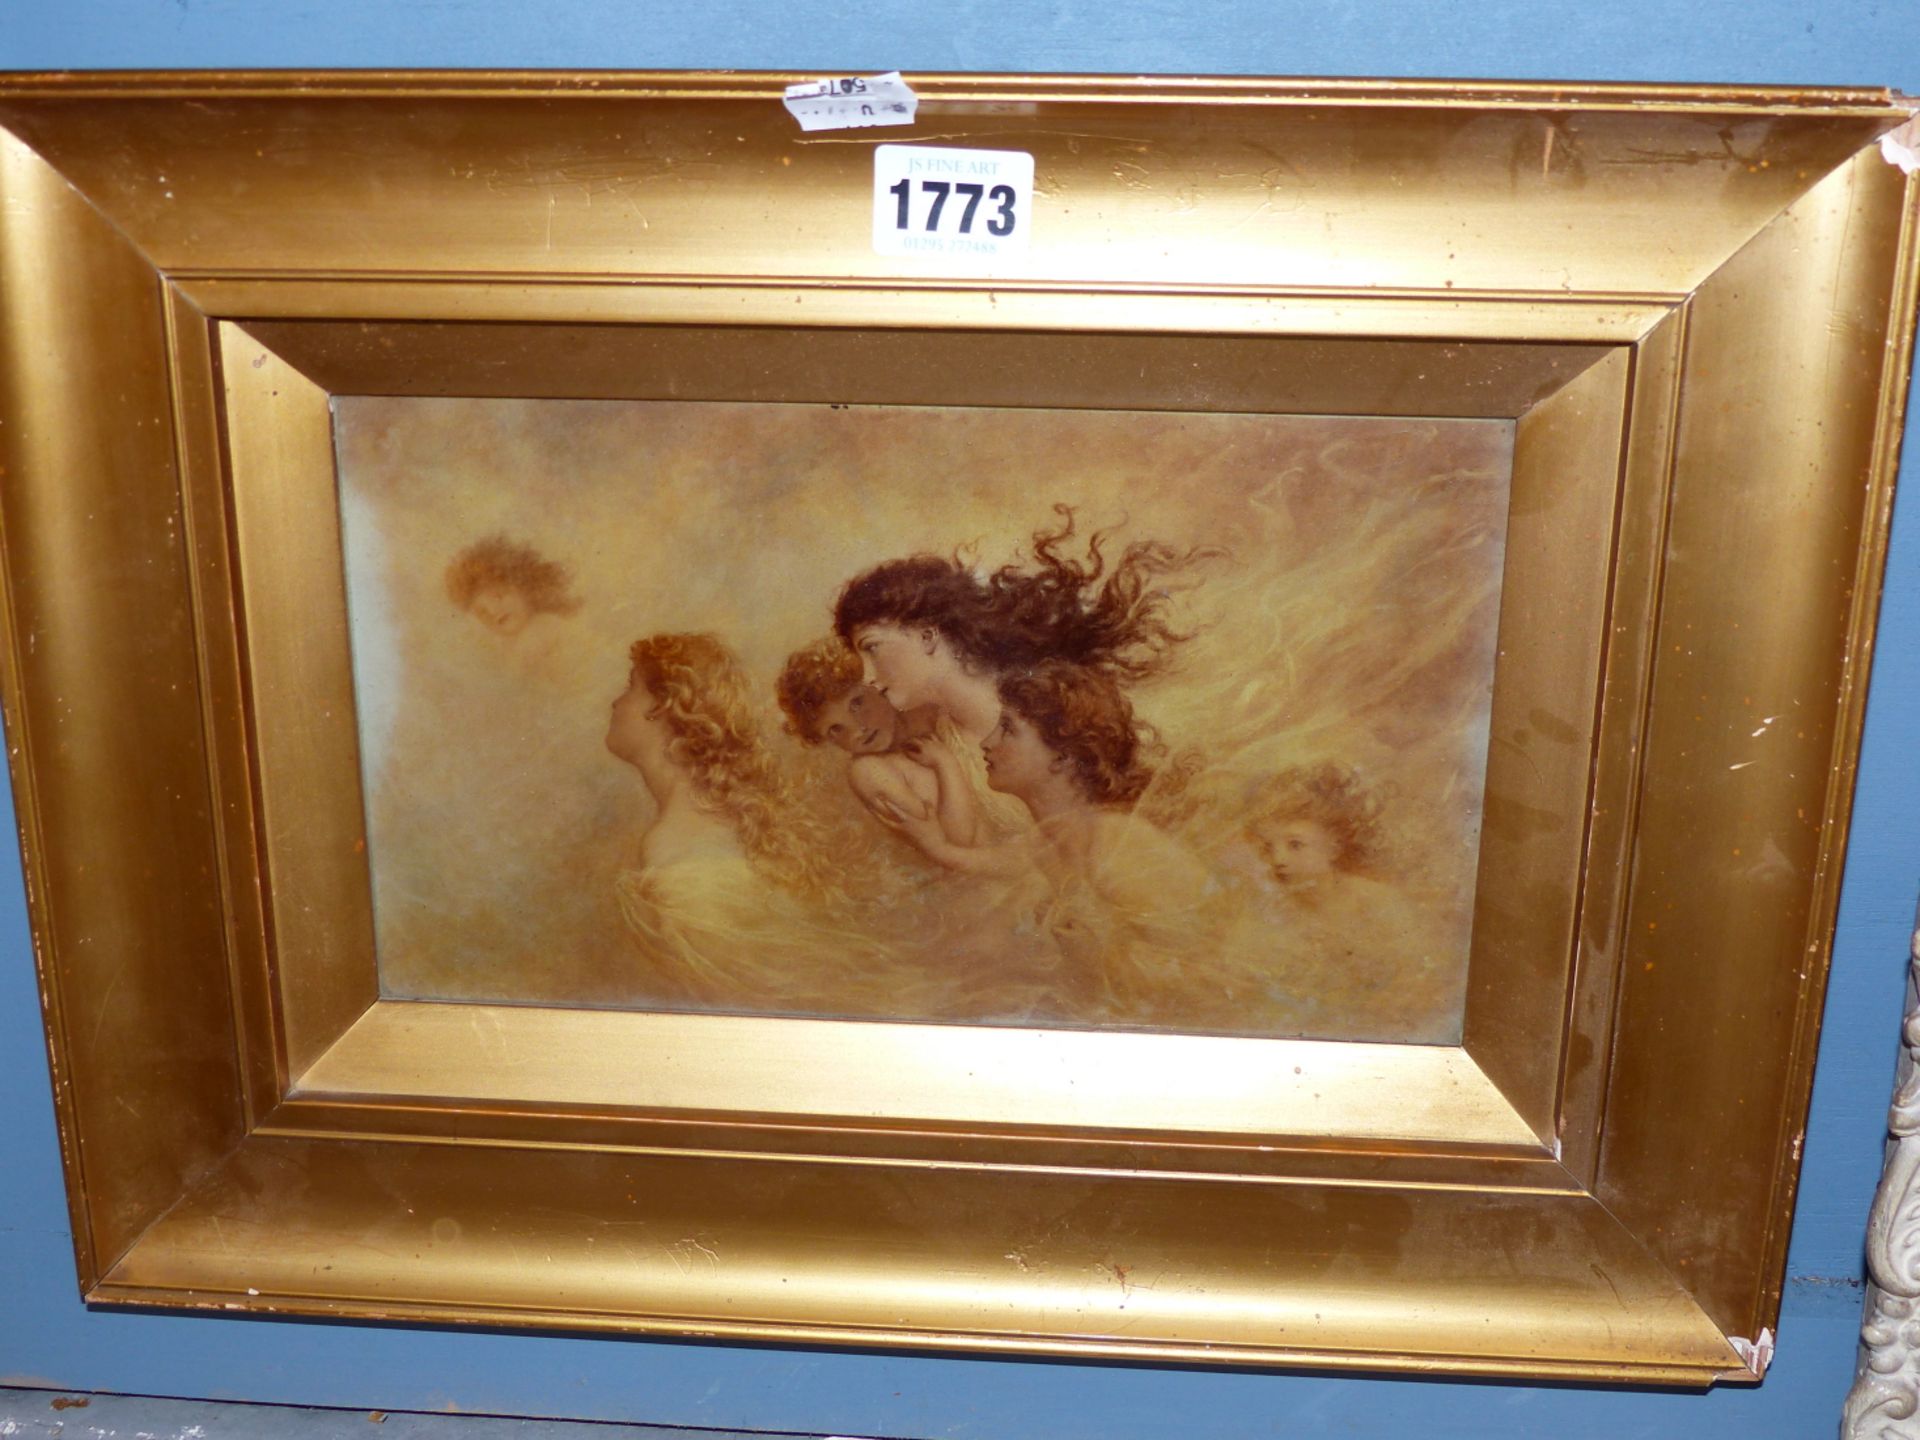 A PRINT OF NYMPHS IN THE PRE RAPHAELITE MANNER, 25 X 14CM, IN GILT FRAME, TOGETHER WITH A REVERSE